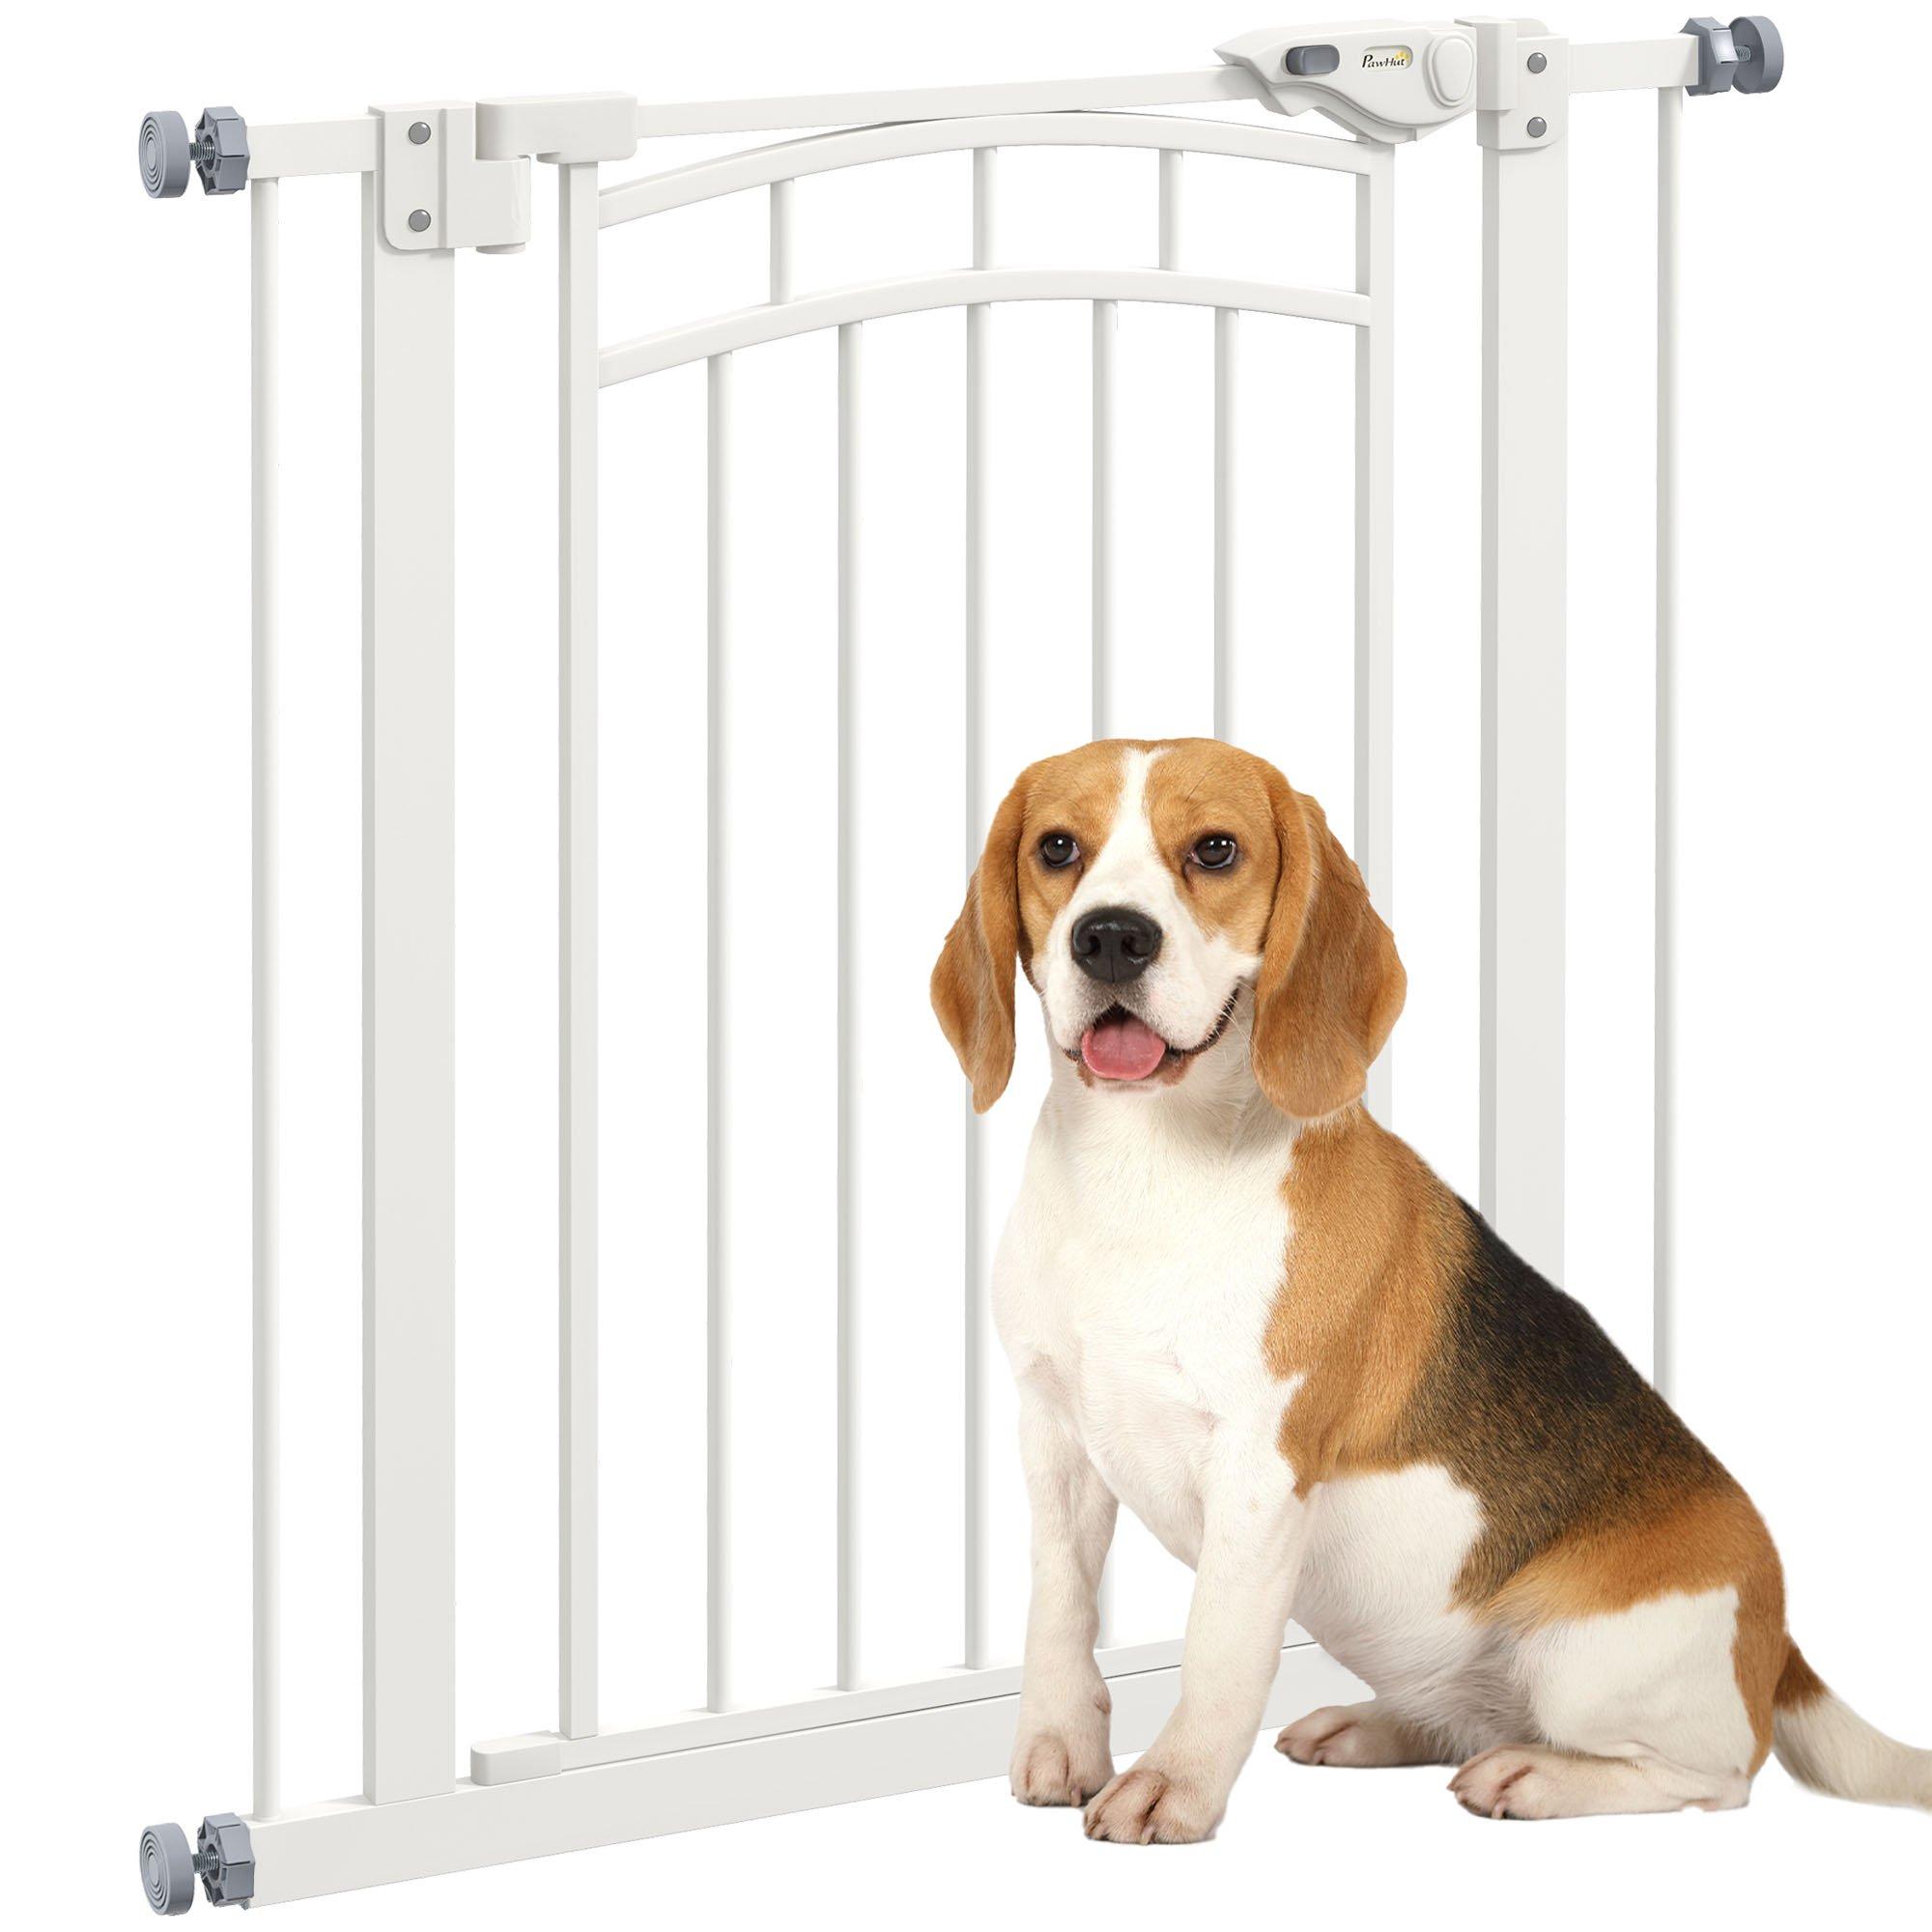 Pressure Fit Safety Gate for Small, Medium Dogs, 74-80cm Openings - White